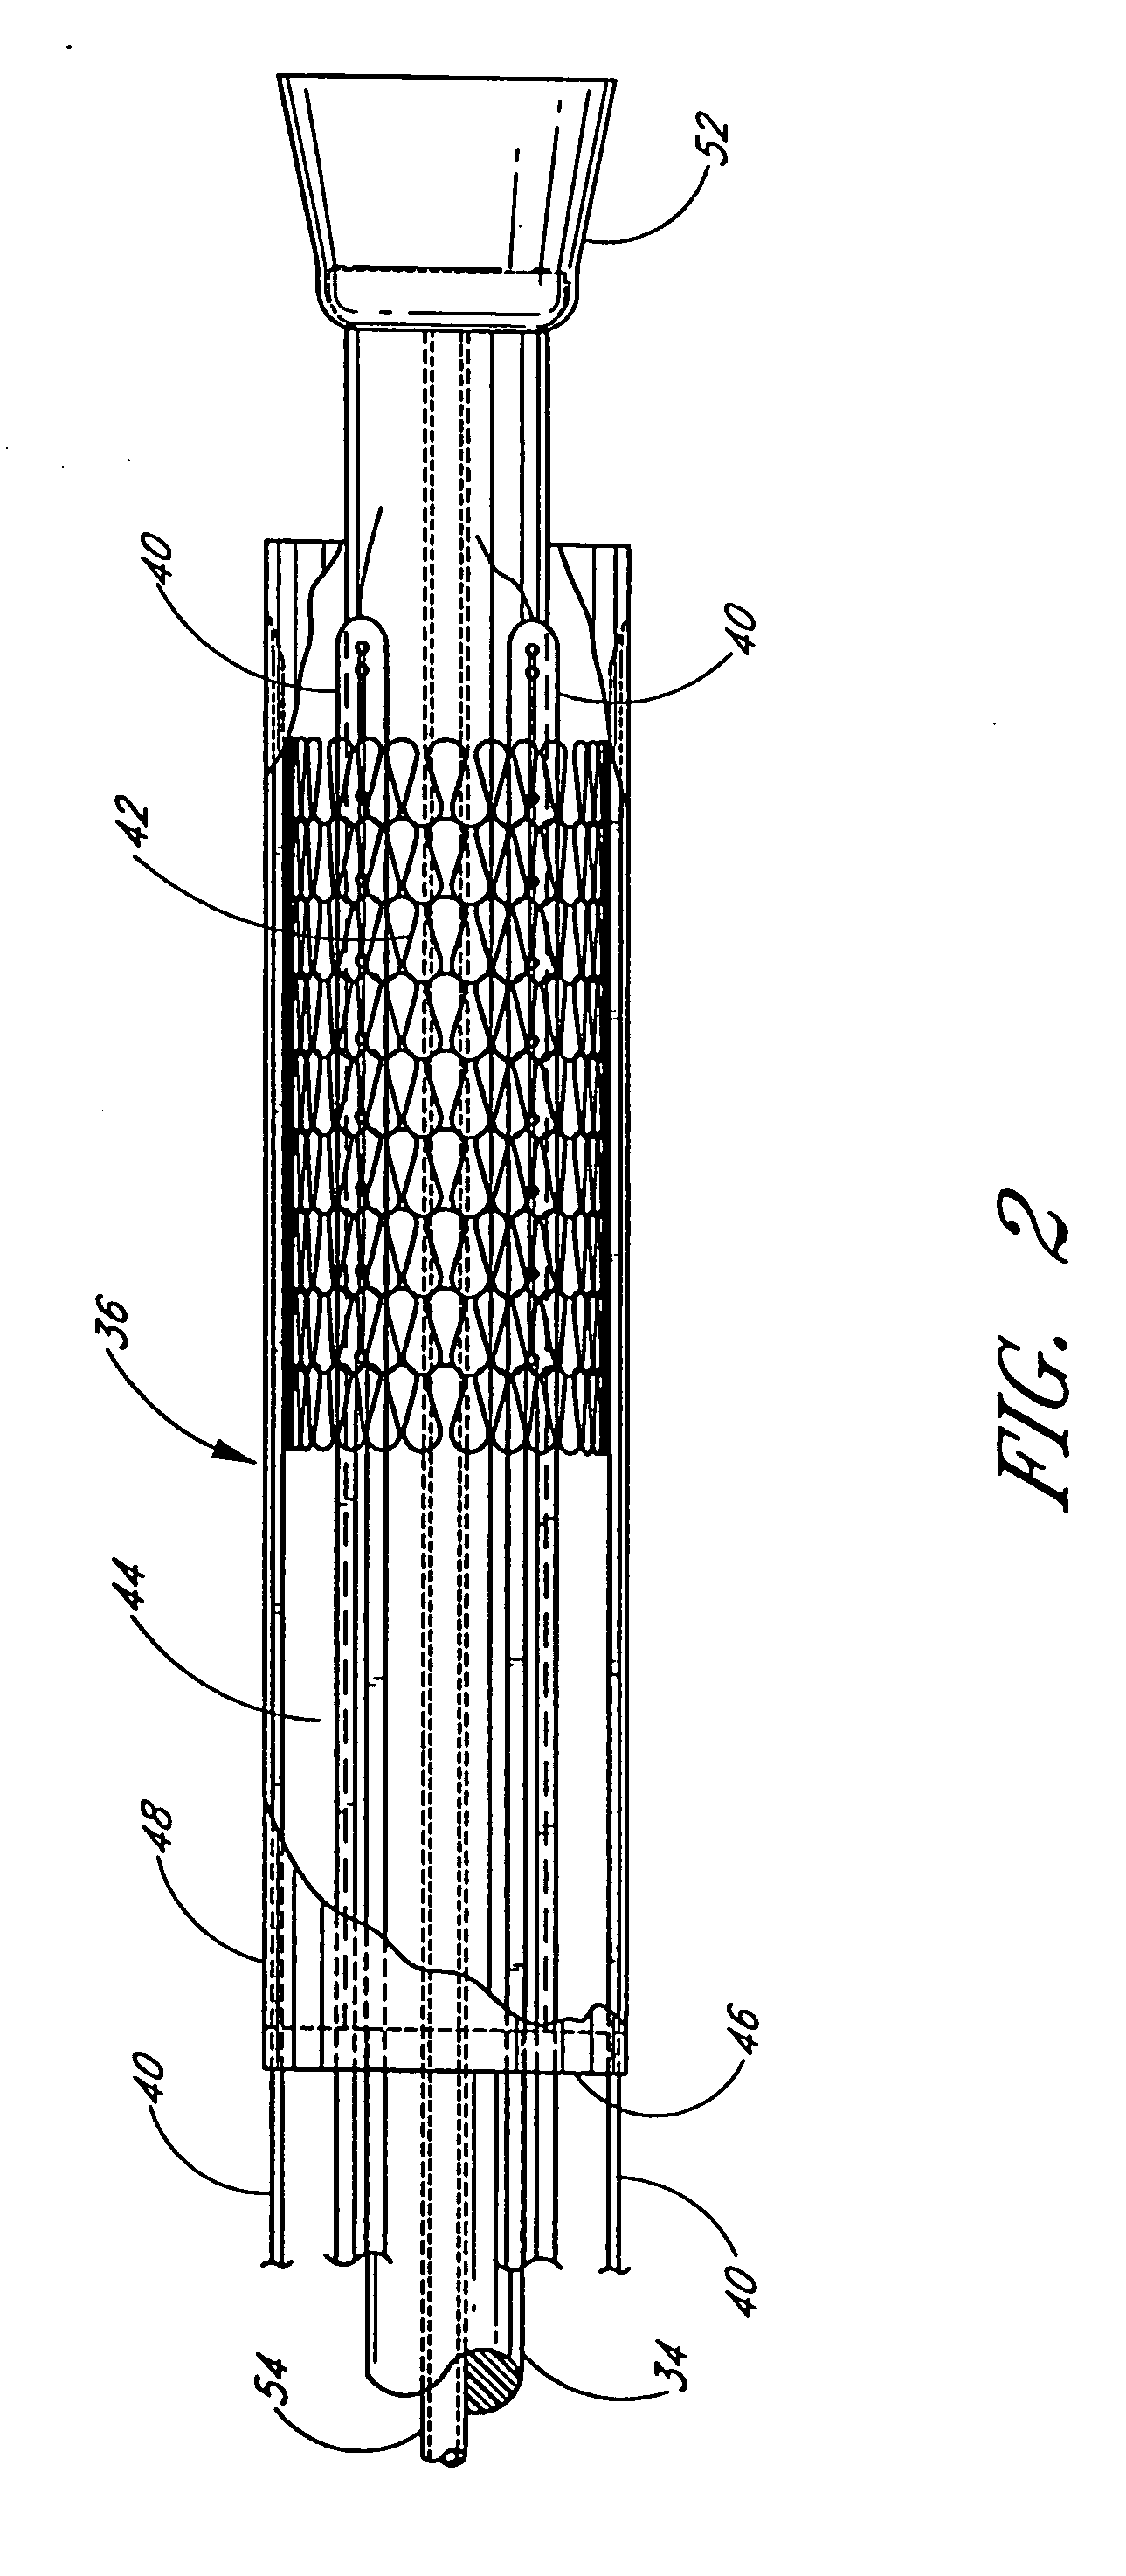 Cardiac harness delivery device and method of use